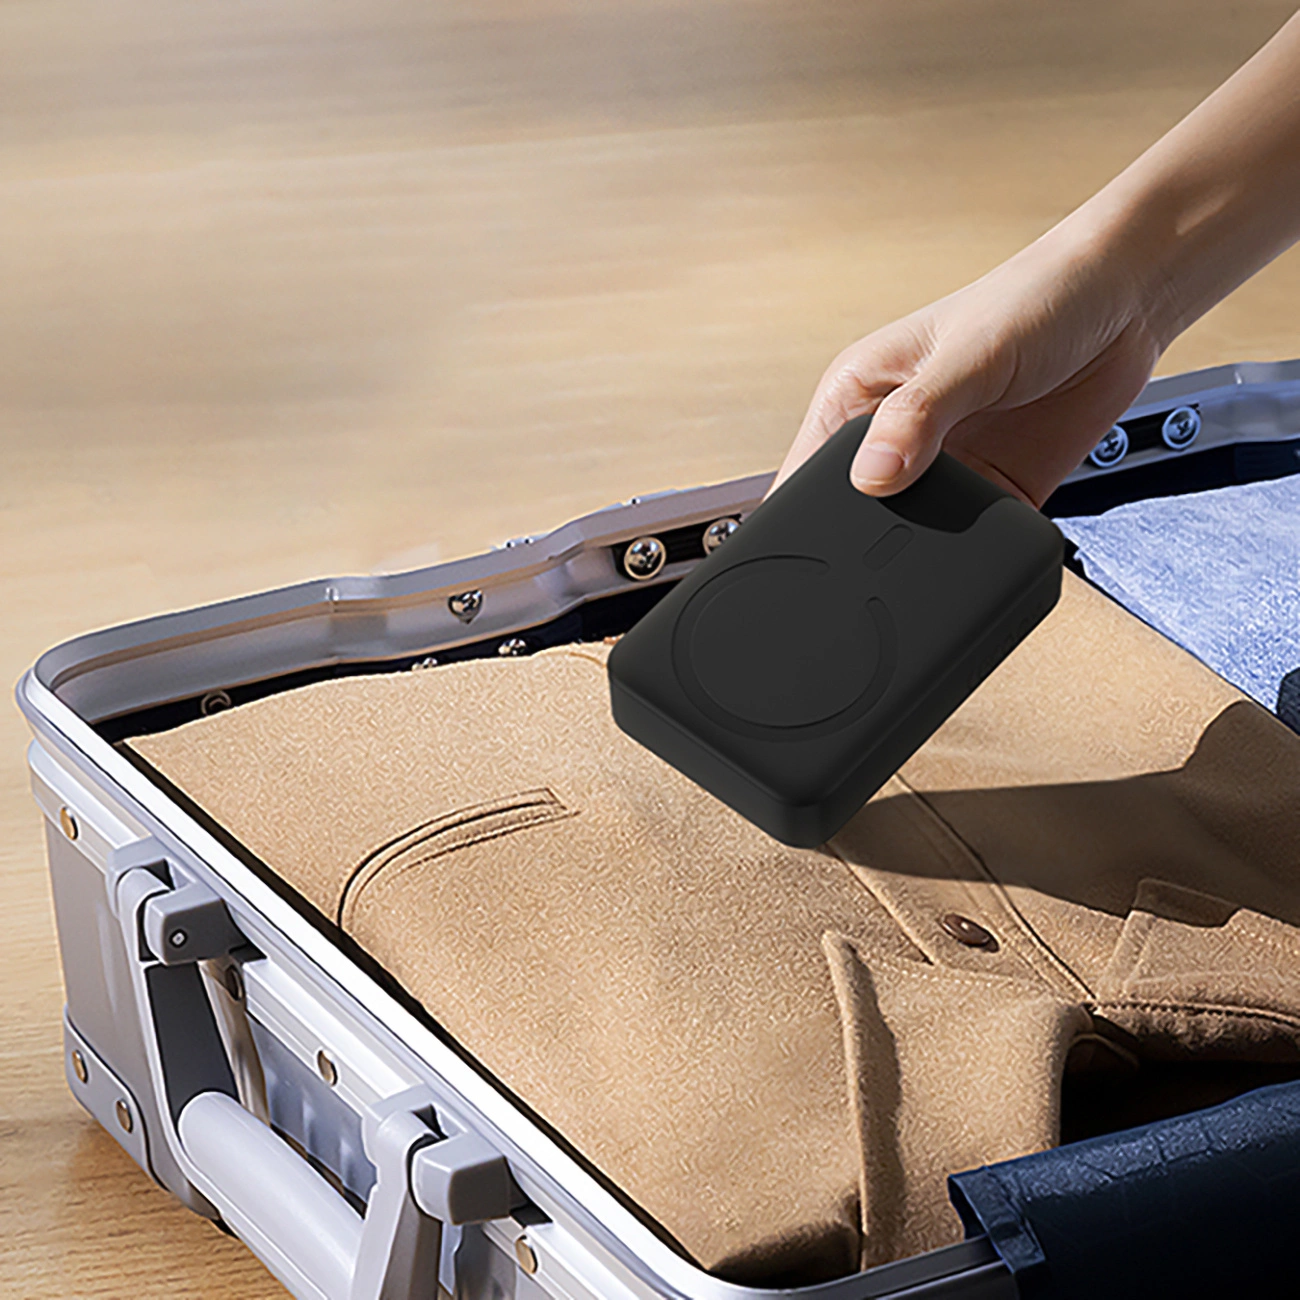 A person puts the Baseus Magnetic Mini Induction Powerbank 10000mAh 30W into a suitcase with clothes